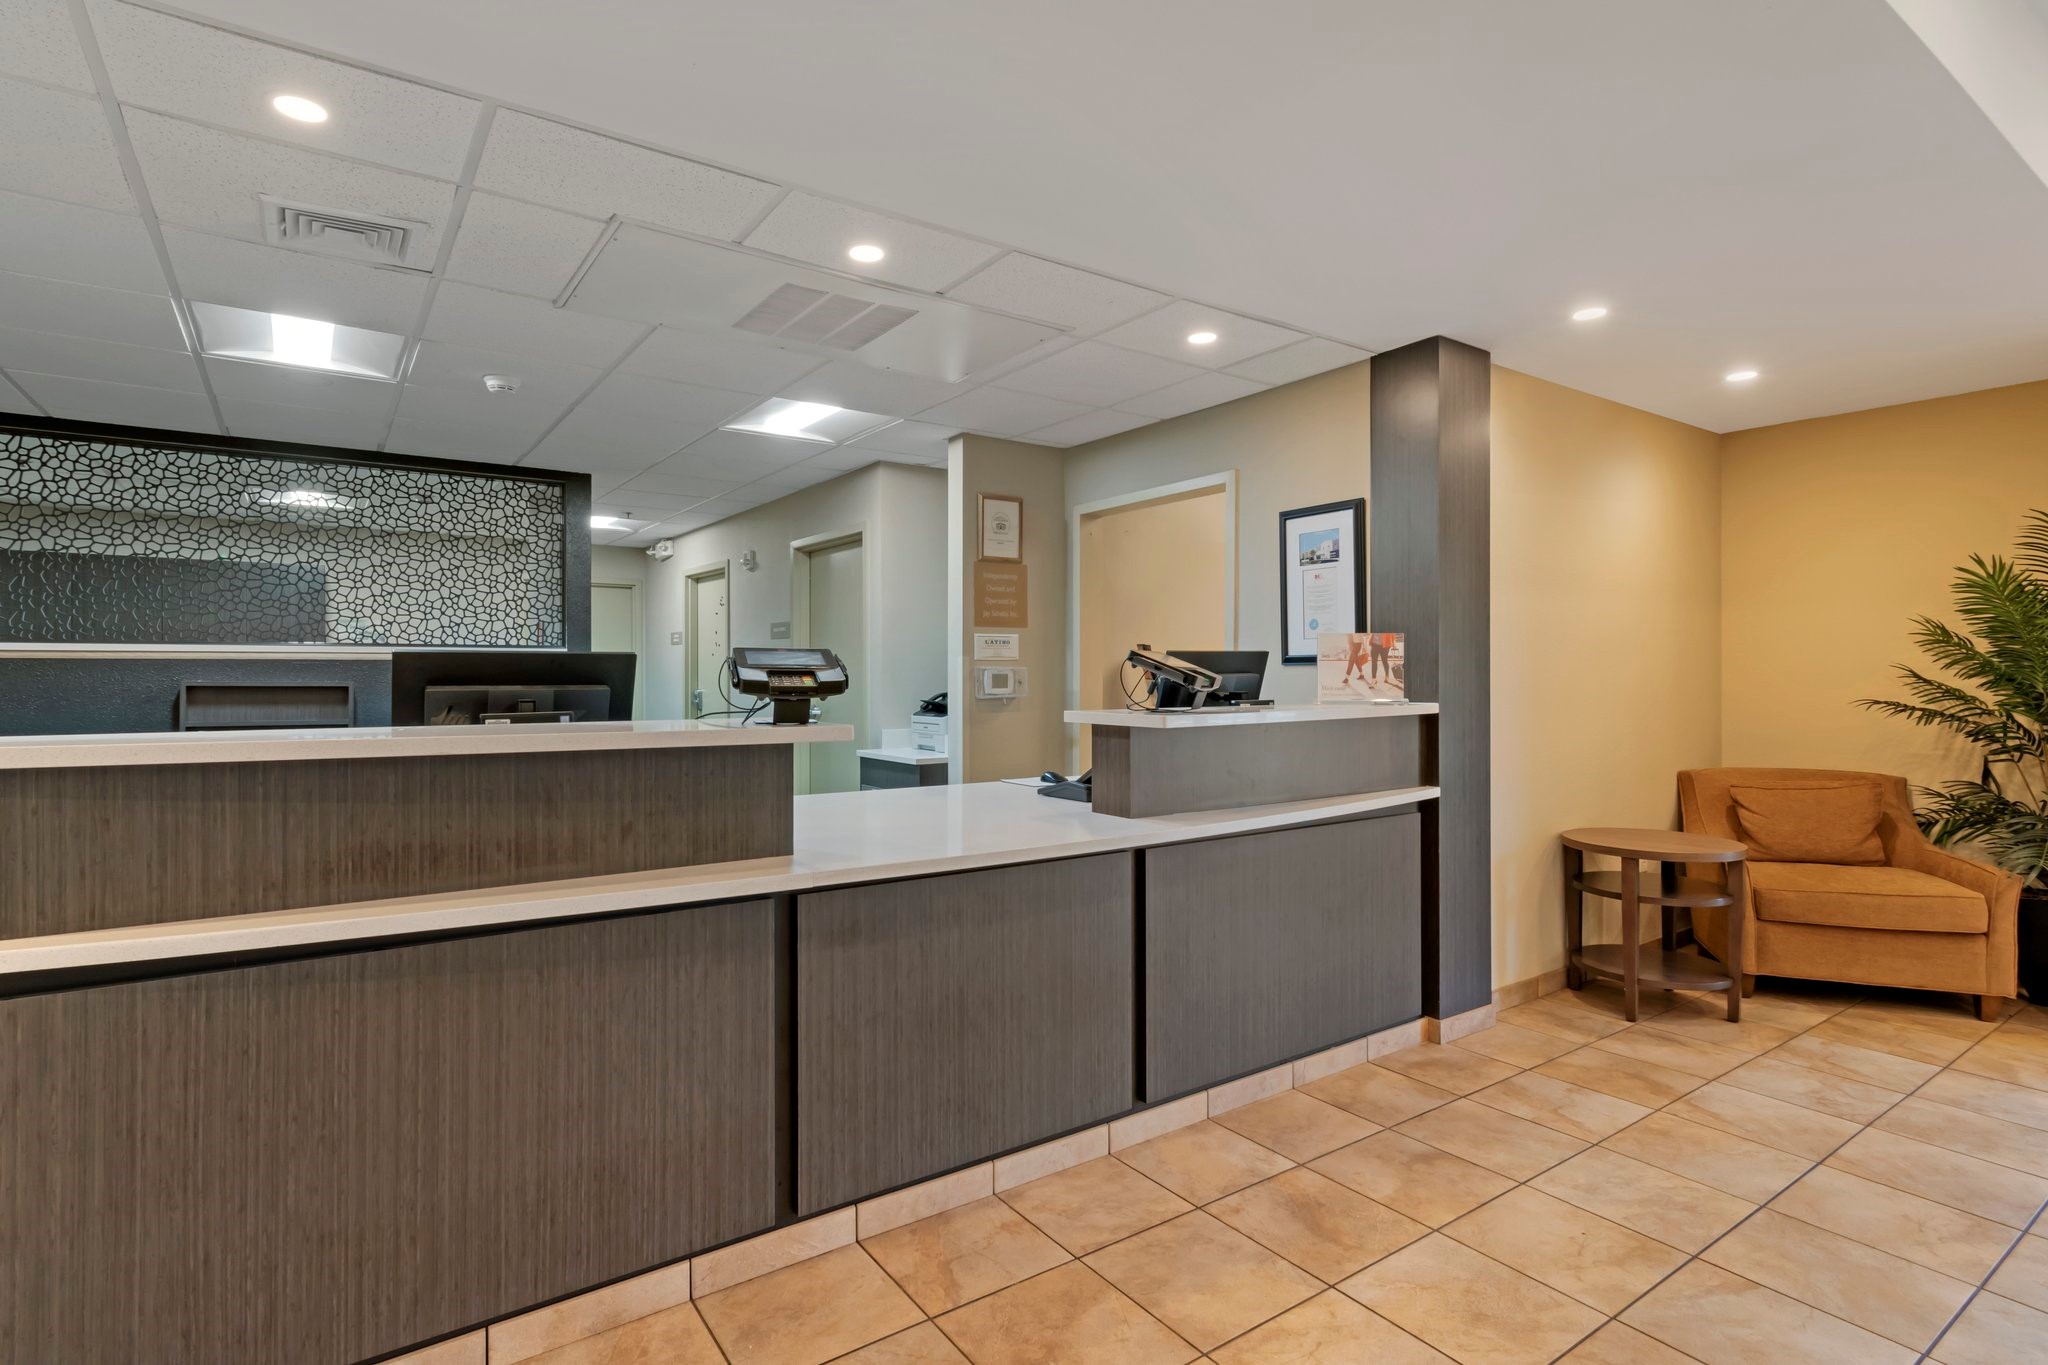 Meeting Rooms at Candlewood Suites READING, 55 SOUTH 3RD AVENUE